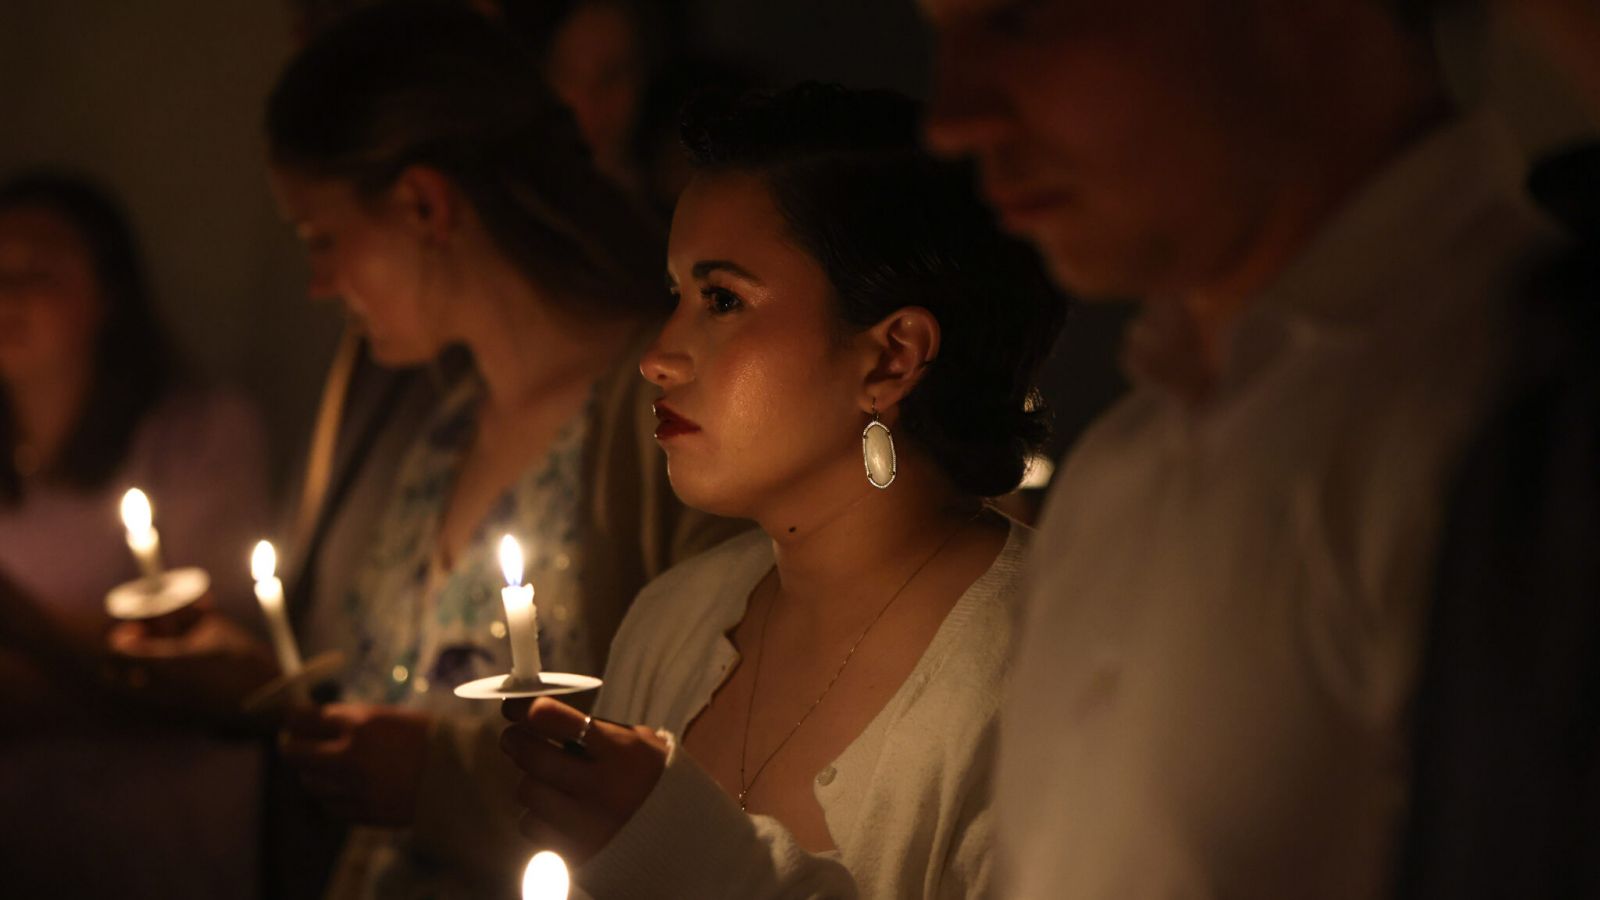 Donna Boy joins others in holding candles at the University Catholic Center at The University of Texas at Dallas the start of the Easter Vigil Mass on March 30. (Michael Gresham/The Texas Catholic)